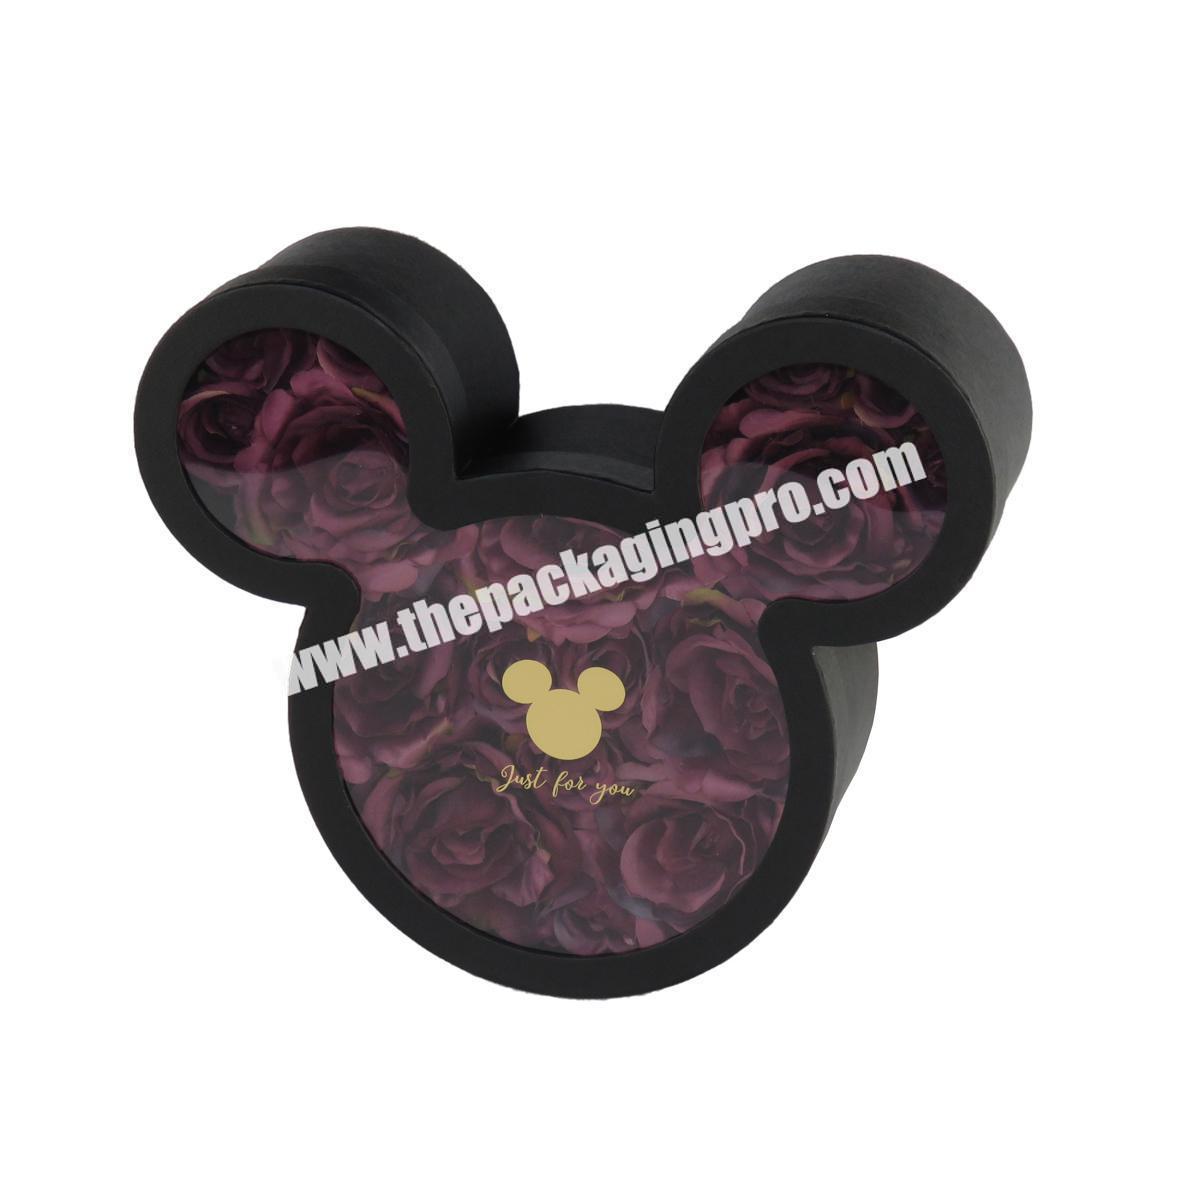 Luxury big mickey mouse shaped gift box for flowers and chocolates